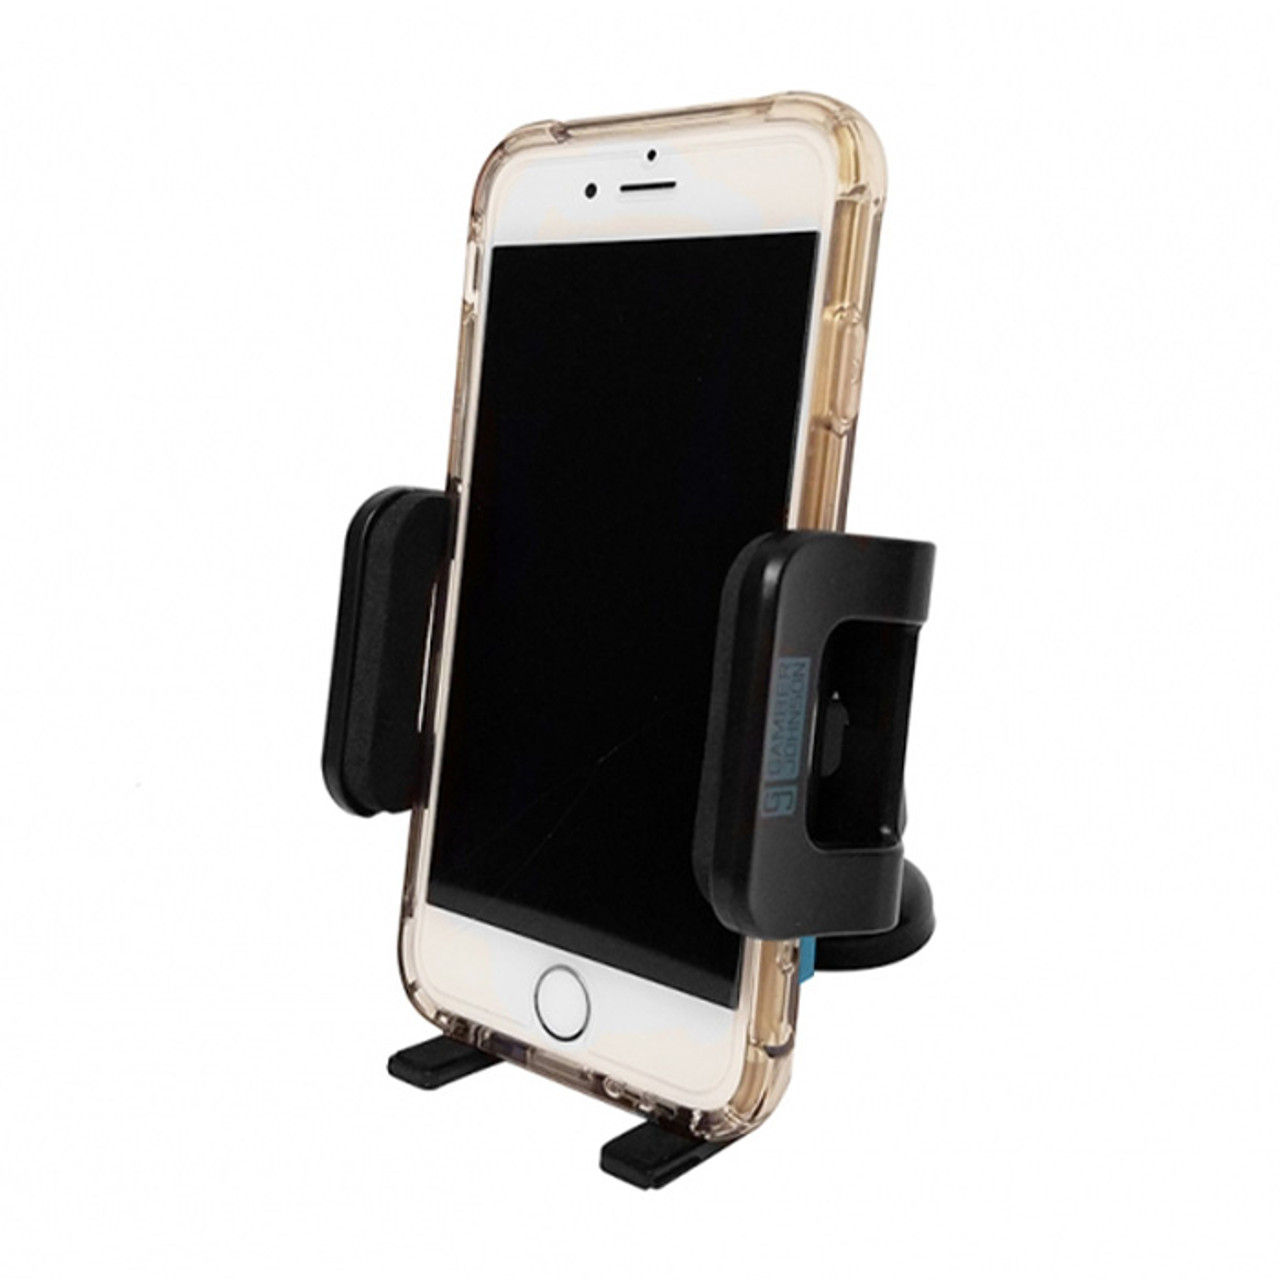 Key ring holder - maros  Cell phone holders and stands, bases for